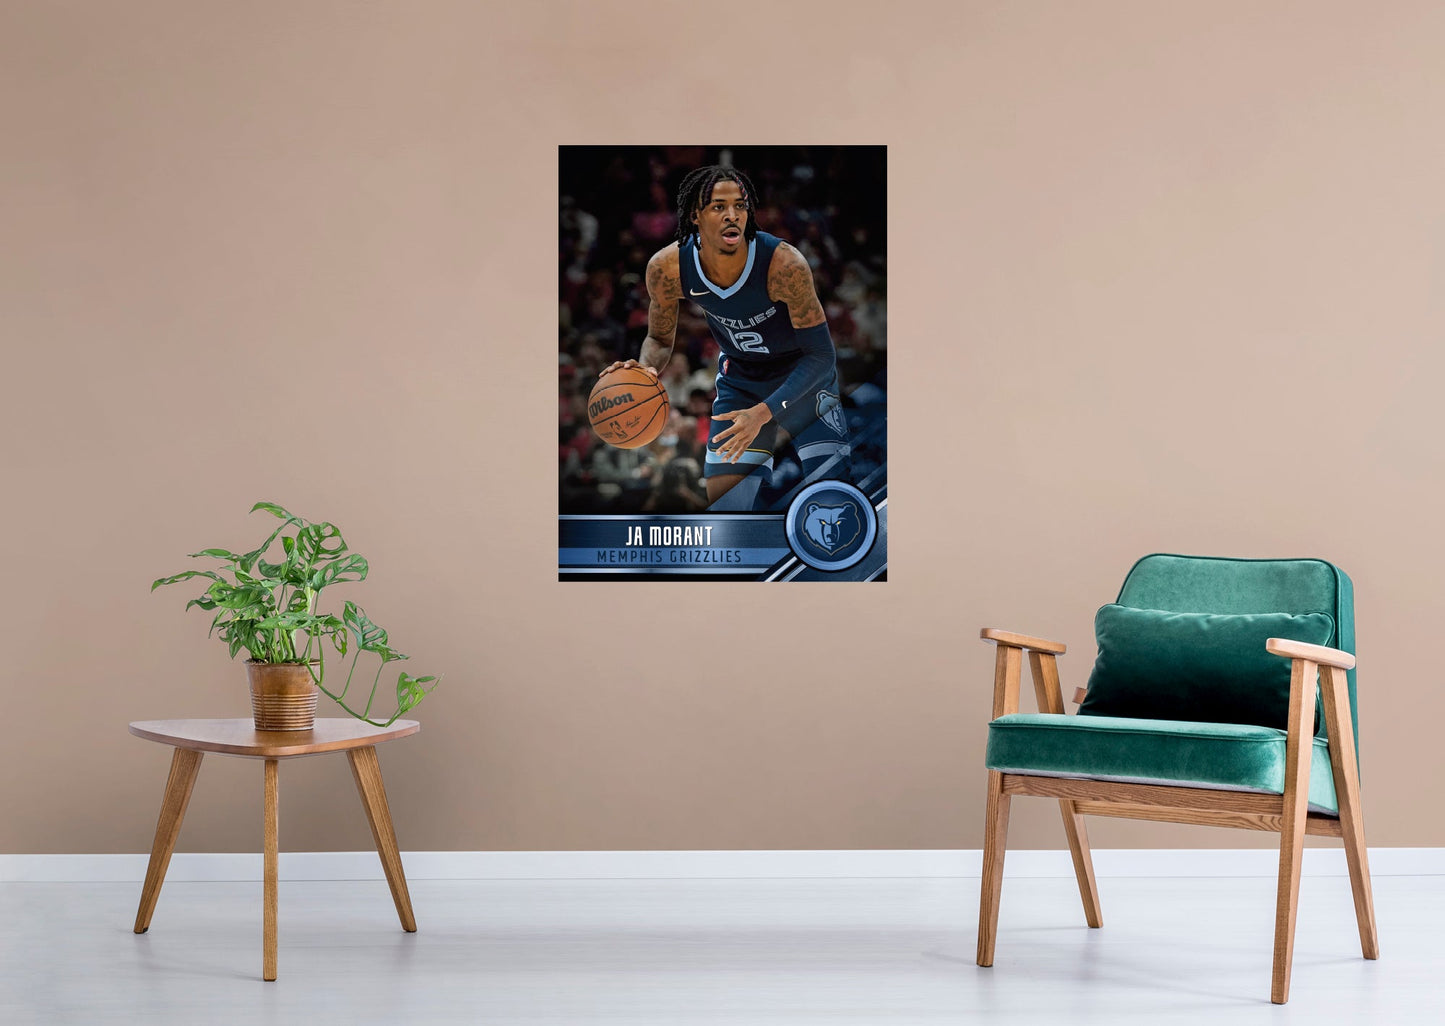 Memphis Grizzlies: Ja Morant Poster - Officially Licensed NBA Removable Adhesive Decal